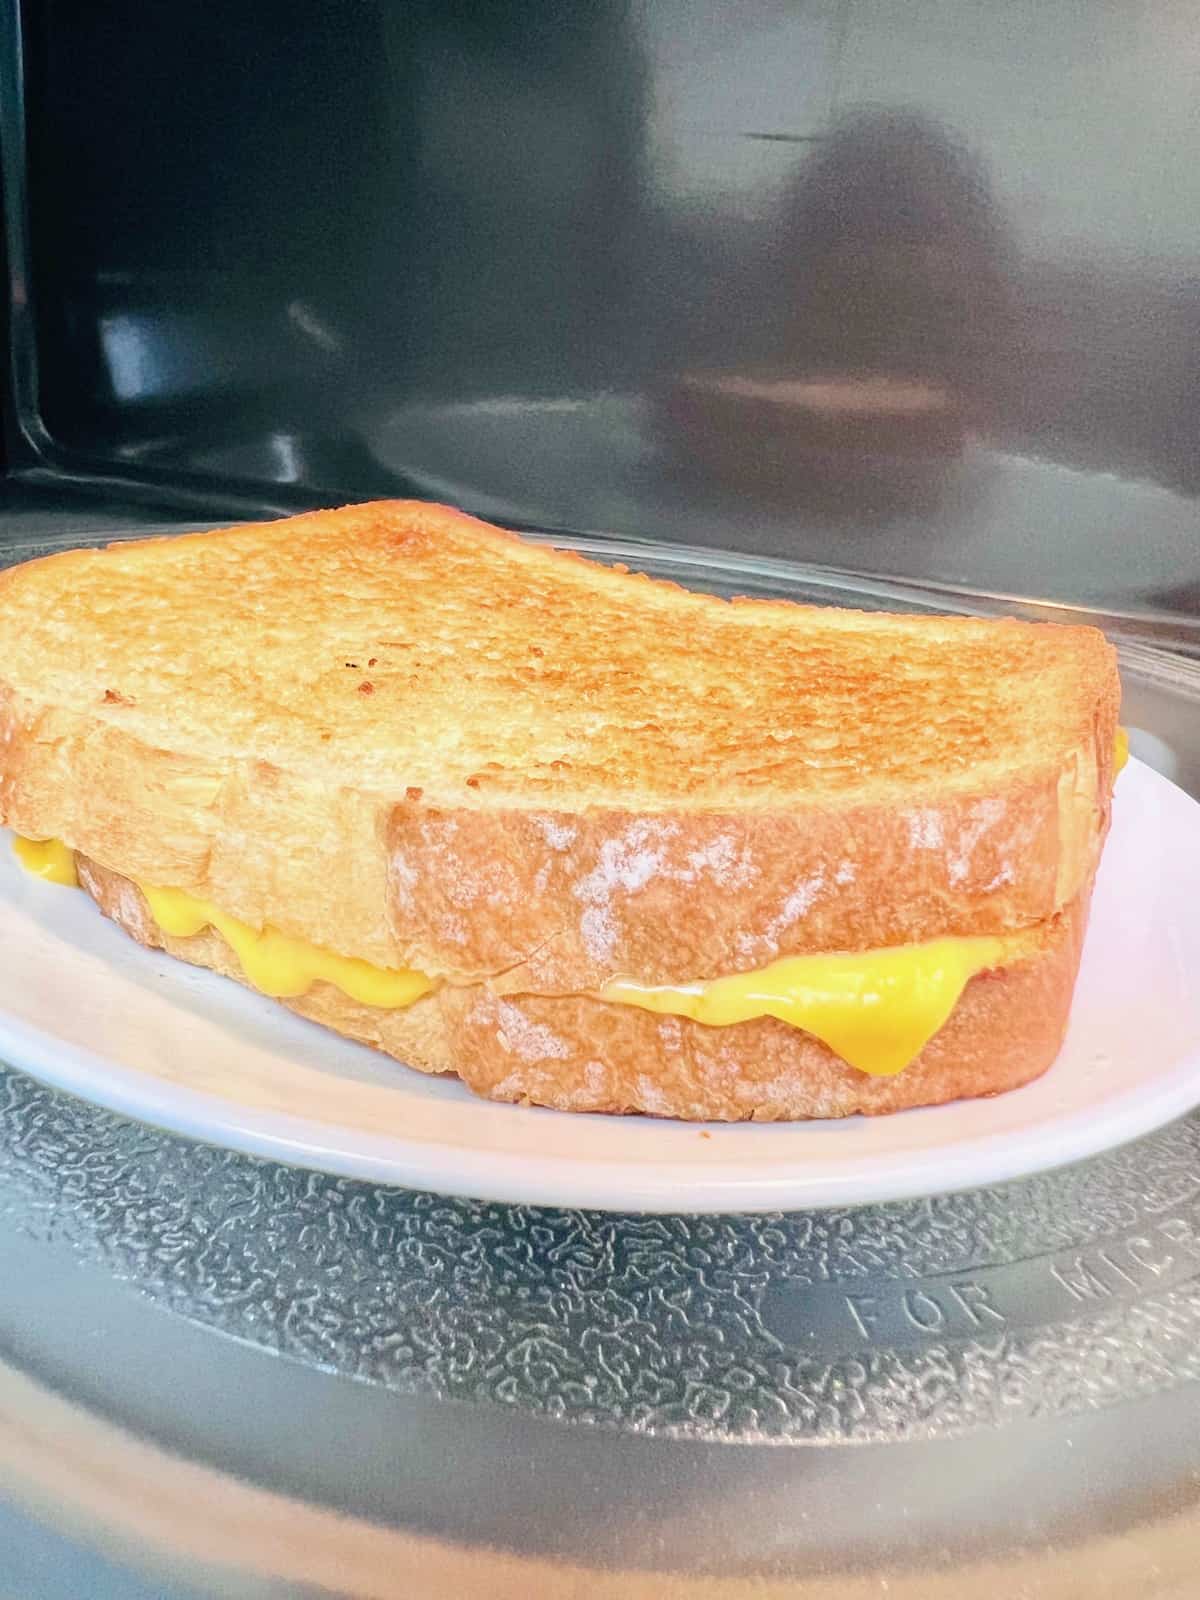 Melted cheddar dripping out of the bread from the plated sandwich in the microwave.